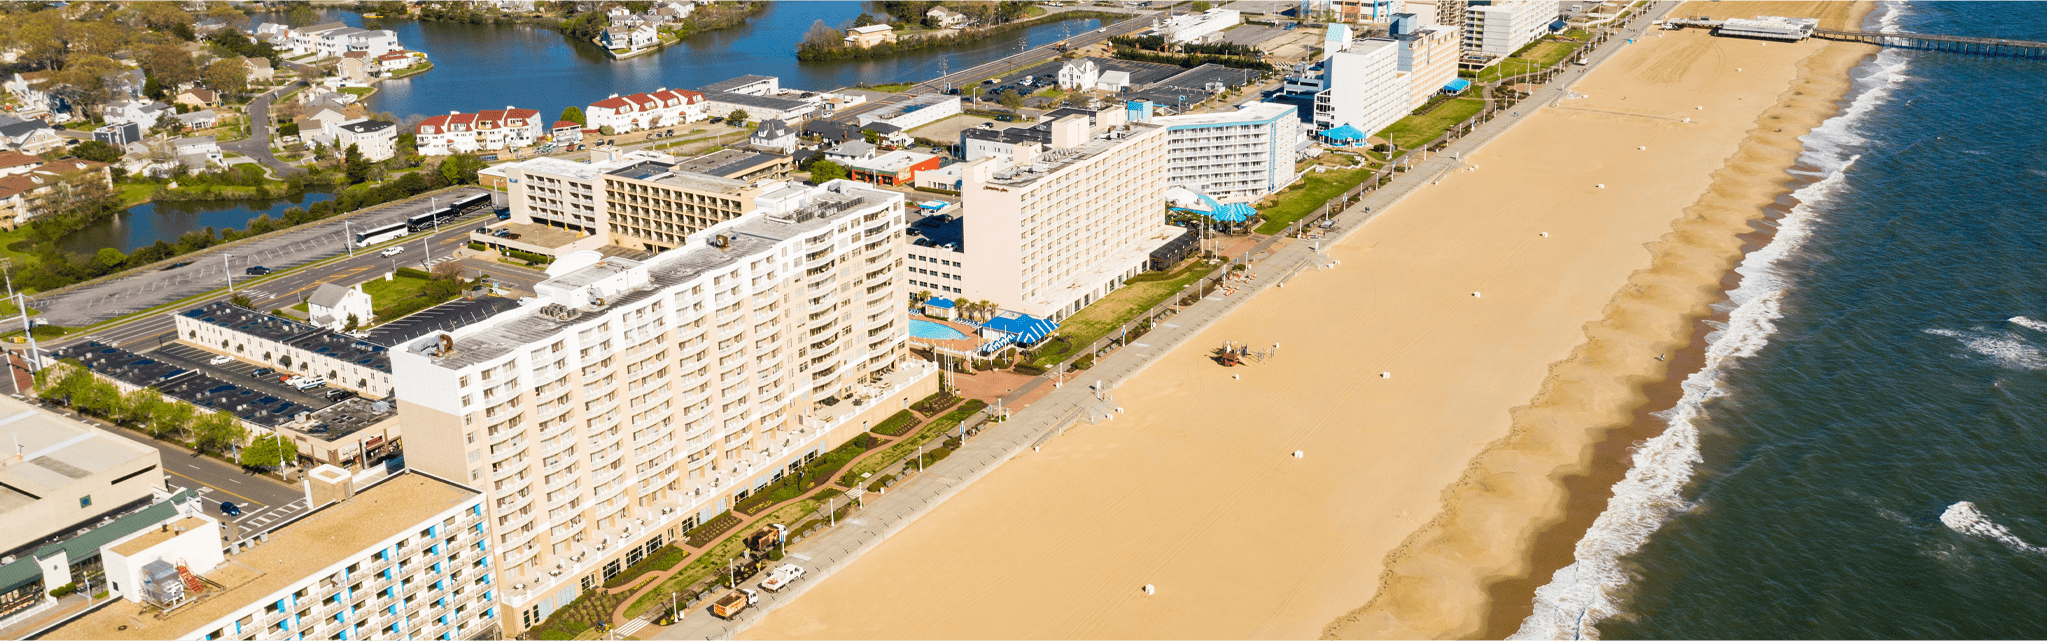 an aerial view of the beach and hotels